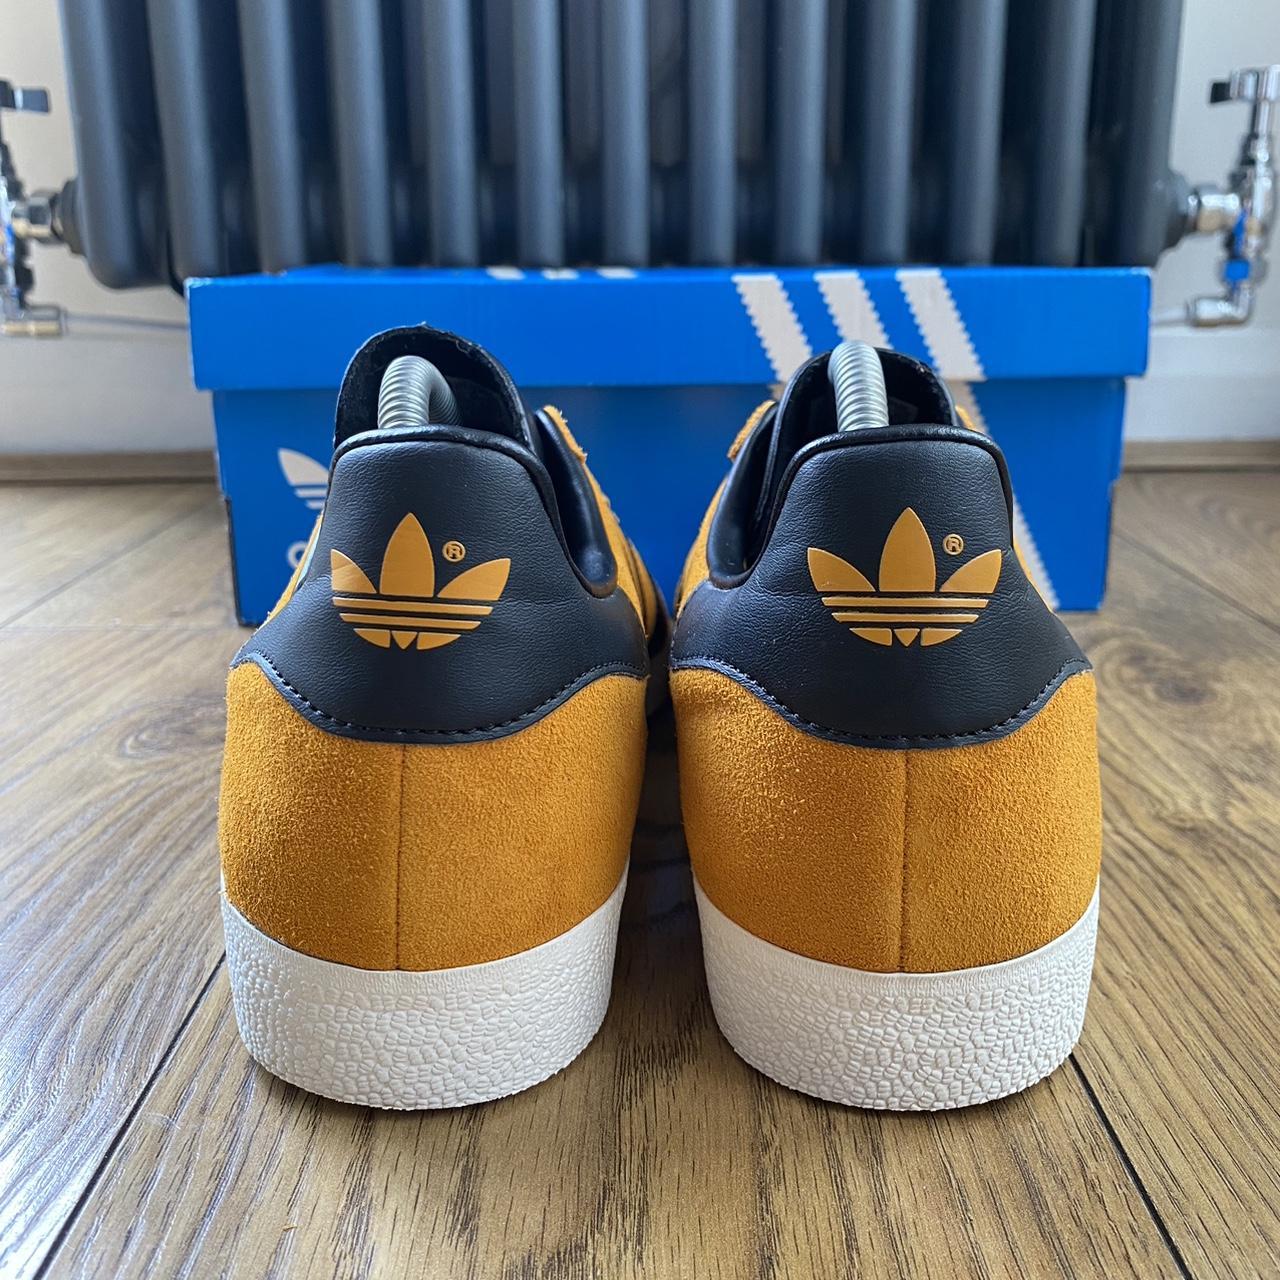 Adidas Gazelle Trainers, Tactile Yellow RARE, these... - Depop